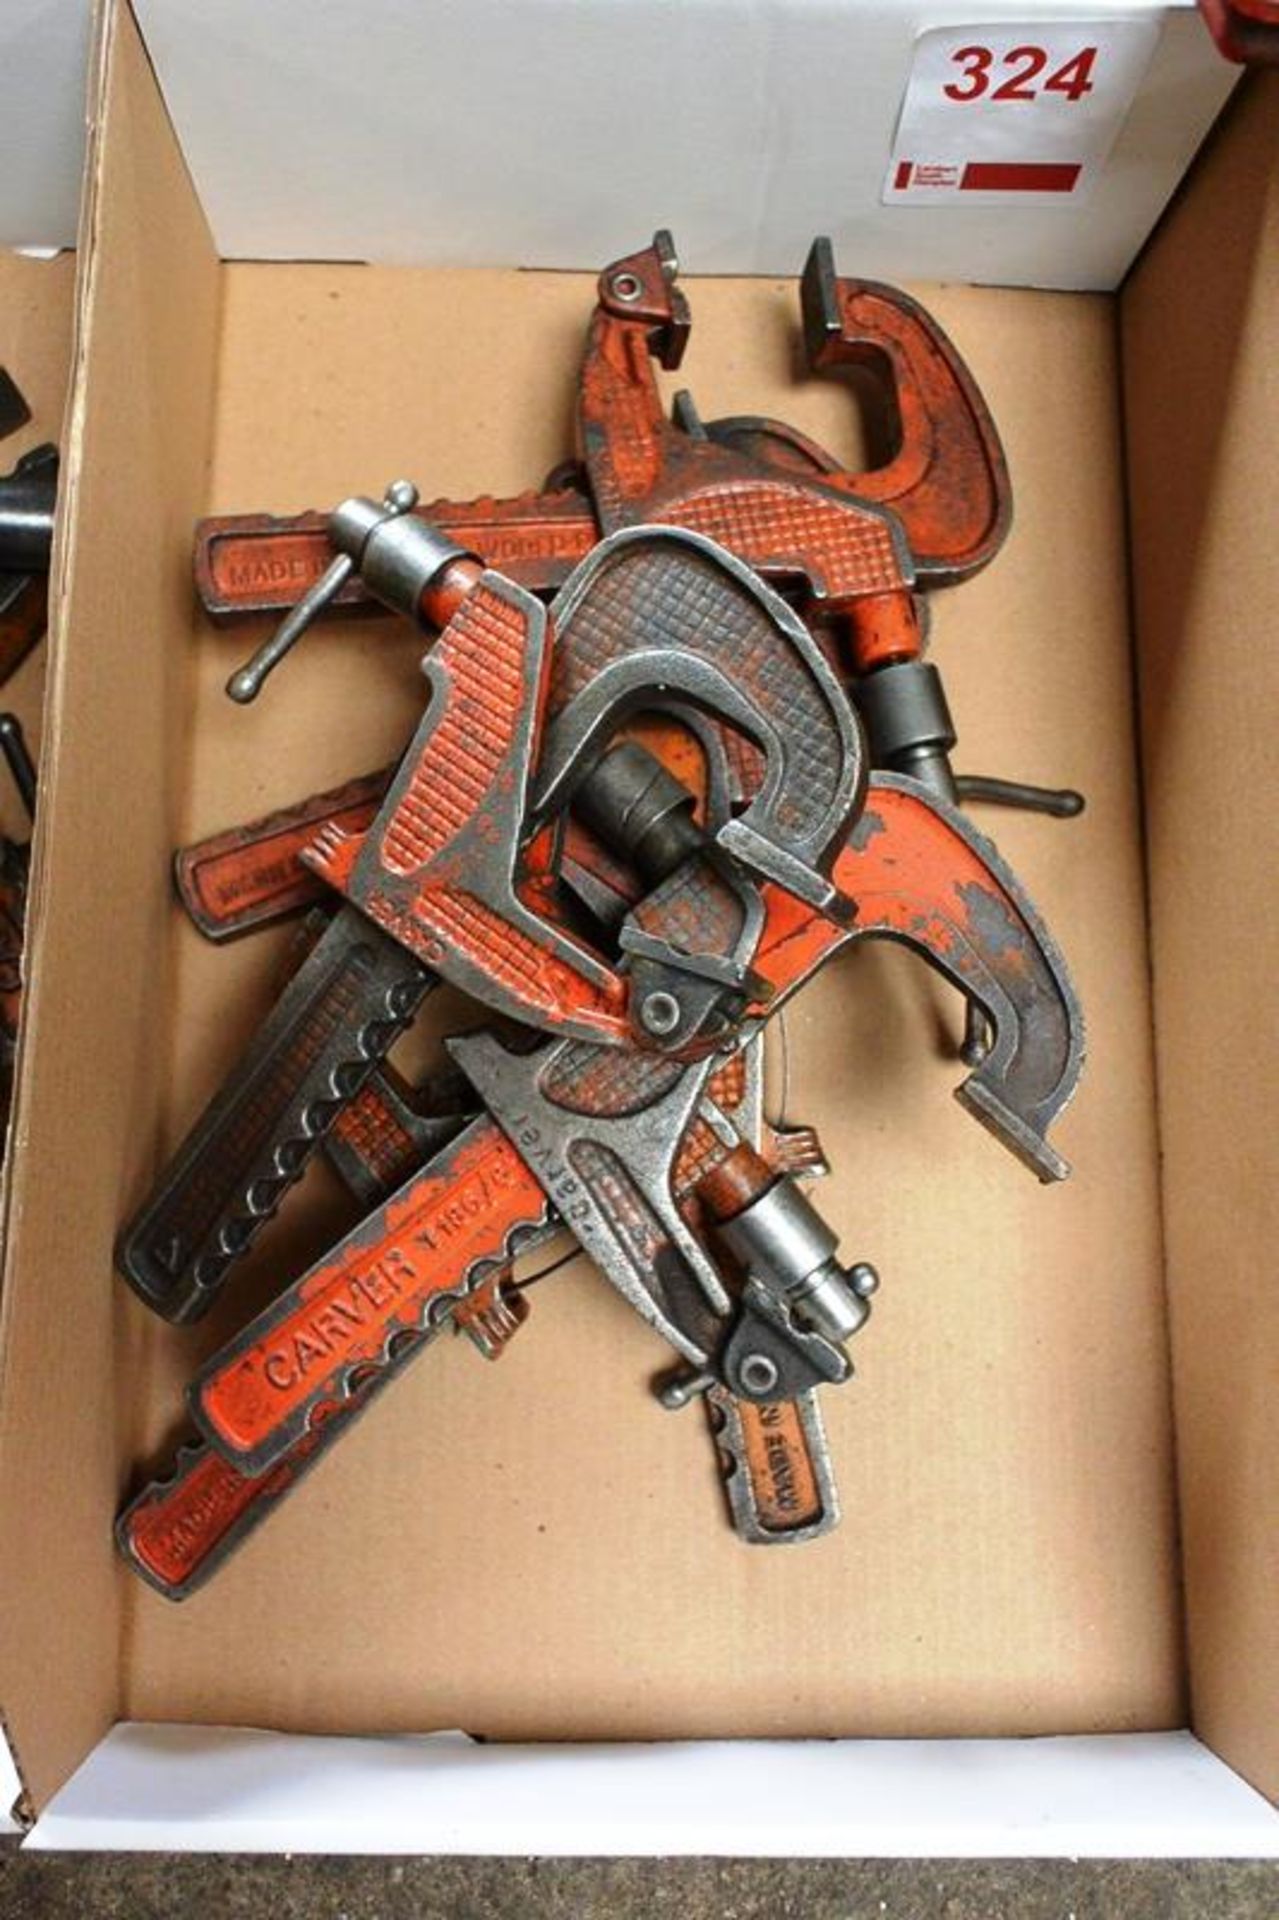 Assorted carver clamps, small (Recommended collection period for this lot Wednesday 15th - Friday